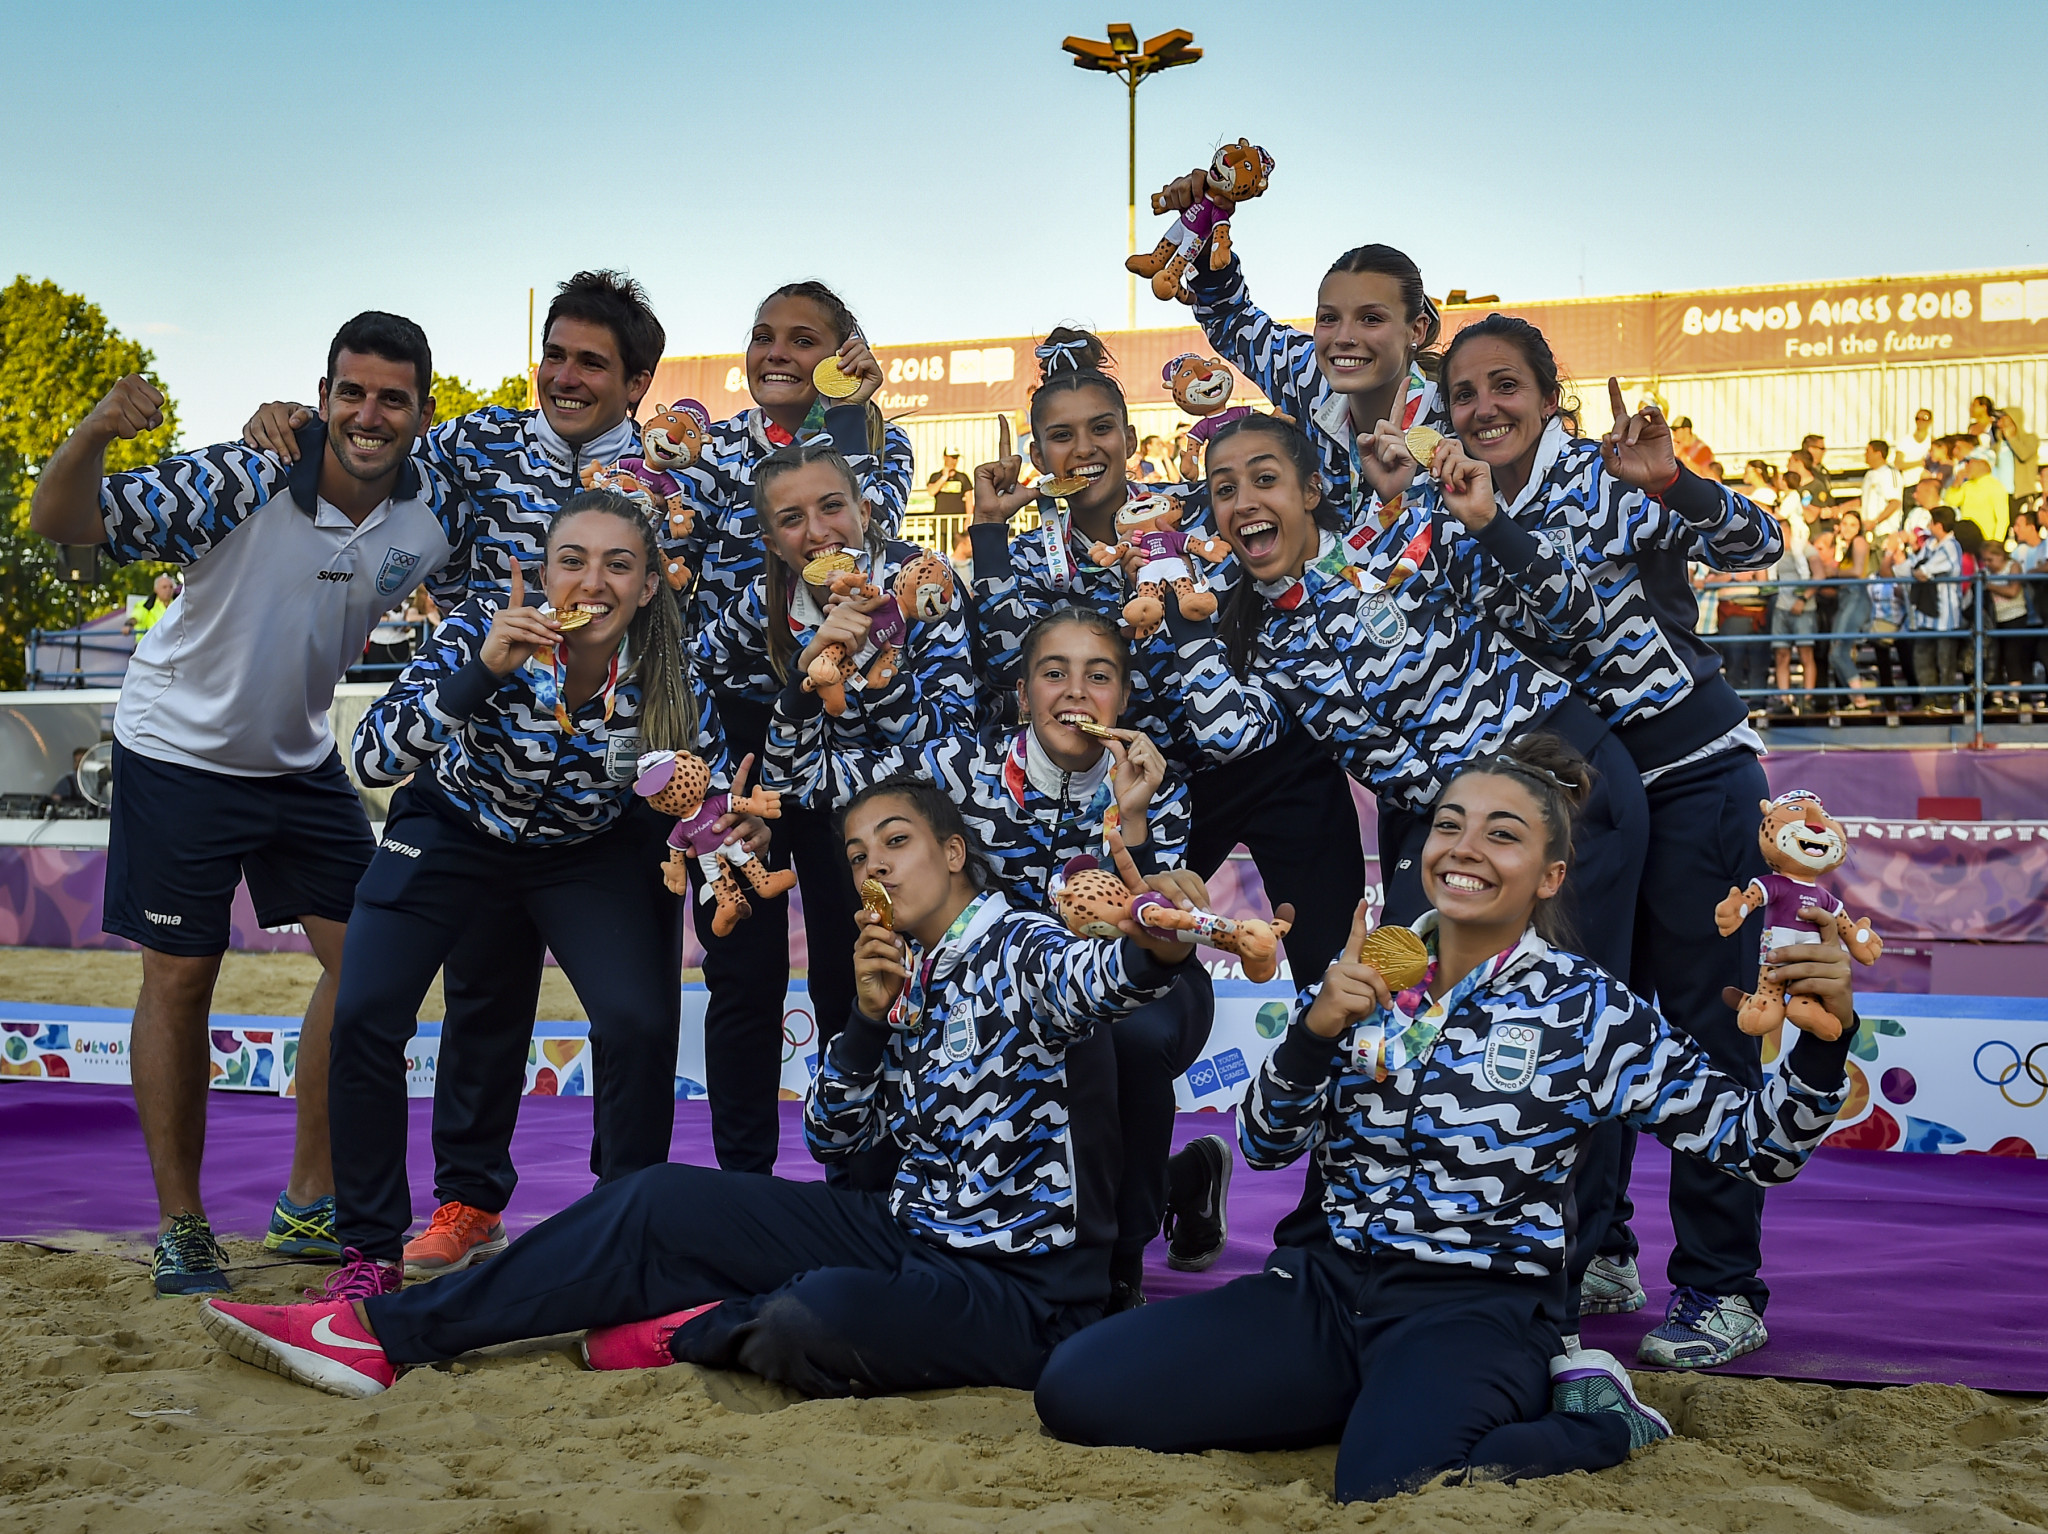 Beach handball is said to have enjoyed a spike in popularity following Argentina's Youth Olympic gold medal ©Getty Images